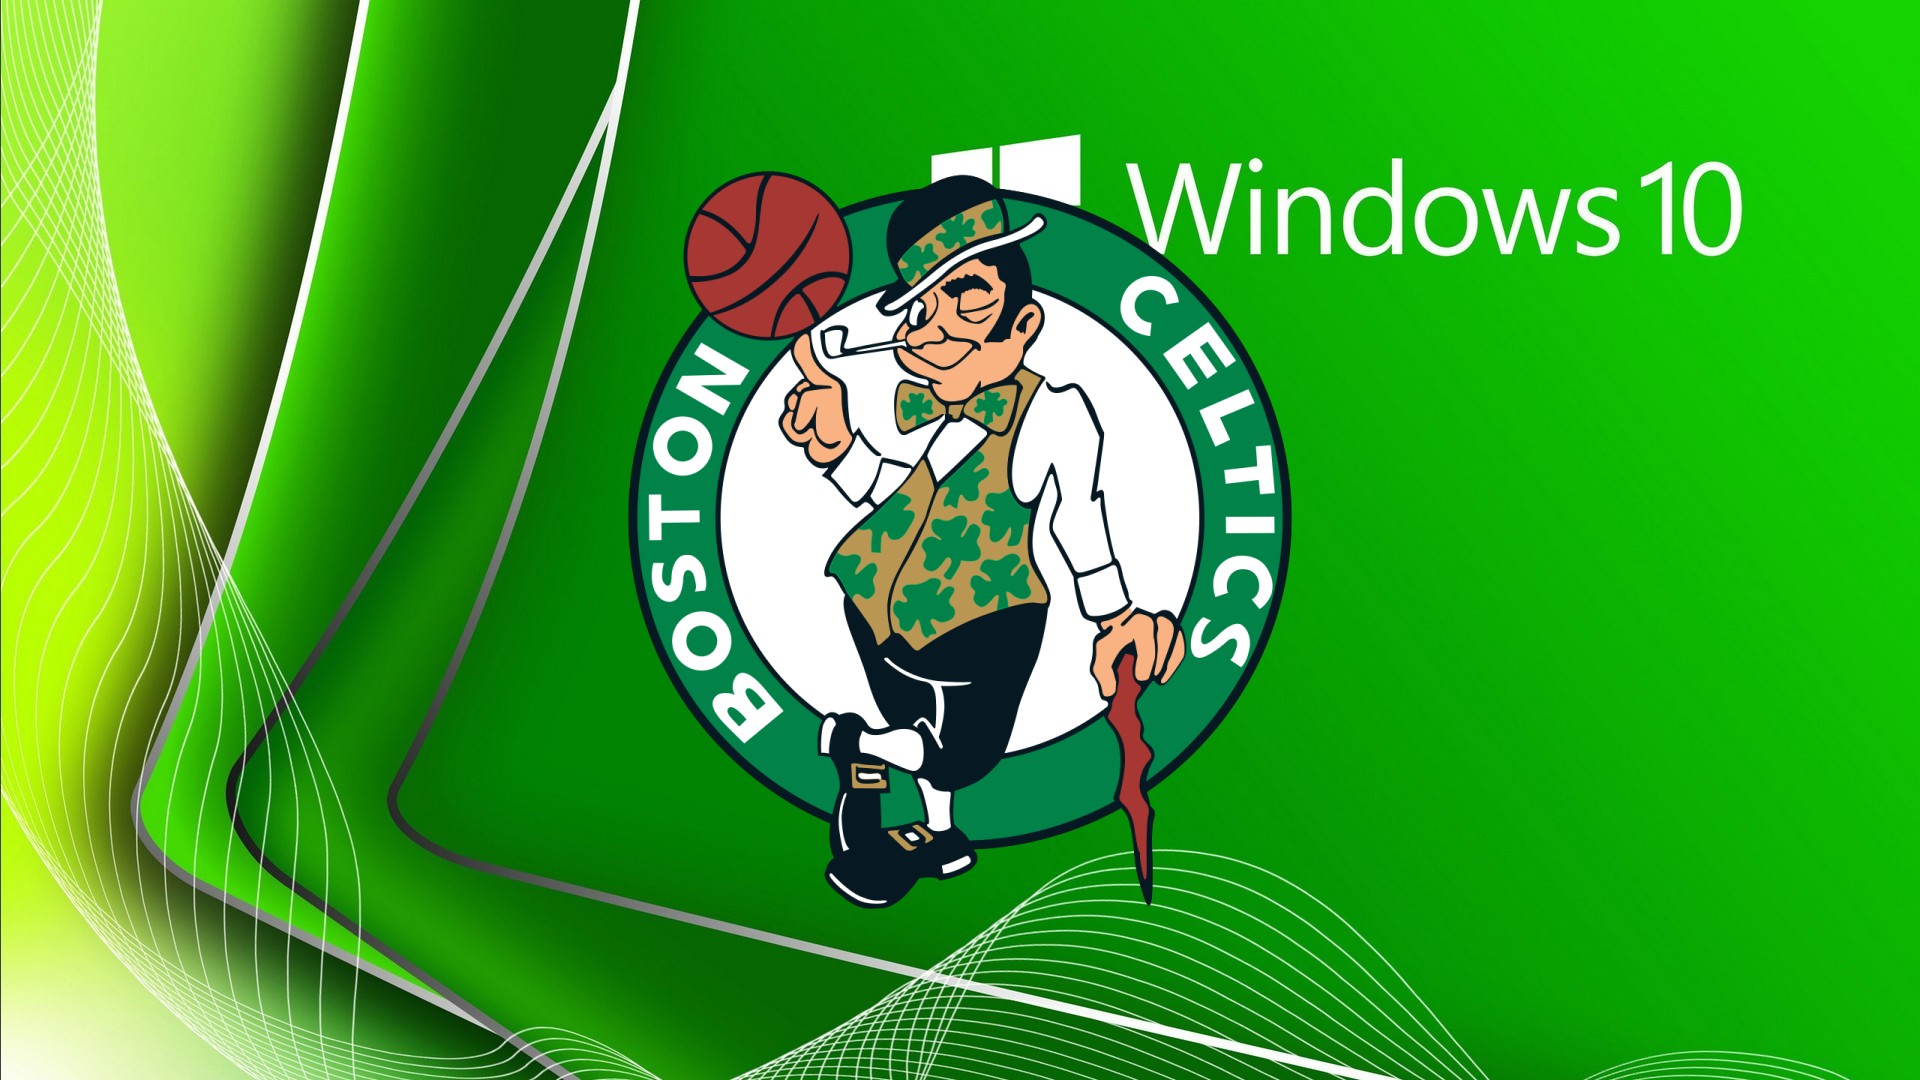 Wallpapers Boston Celtics with image dimensions 1920x1080 pixel. You can make this wallpaper for your Desktop Computer Backgrounds, Windows or Mac Screensavers, iPhone Lock screen, Tablet or Android and another Mobile Phone device